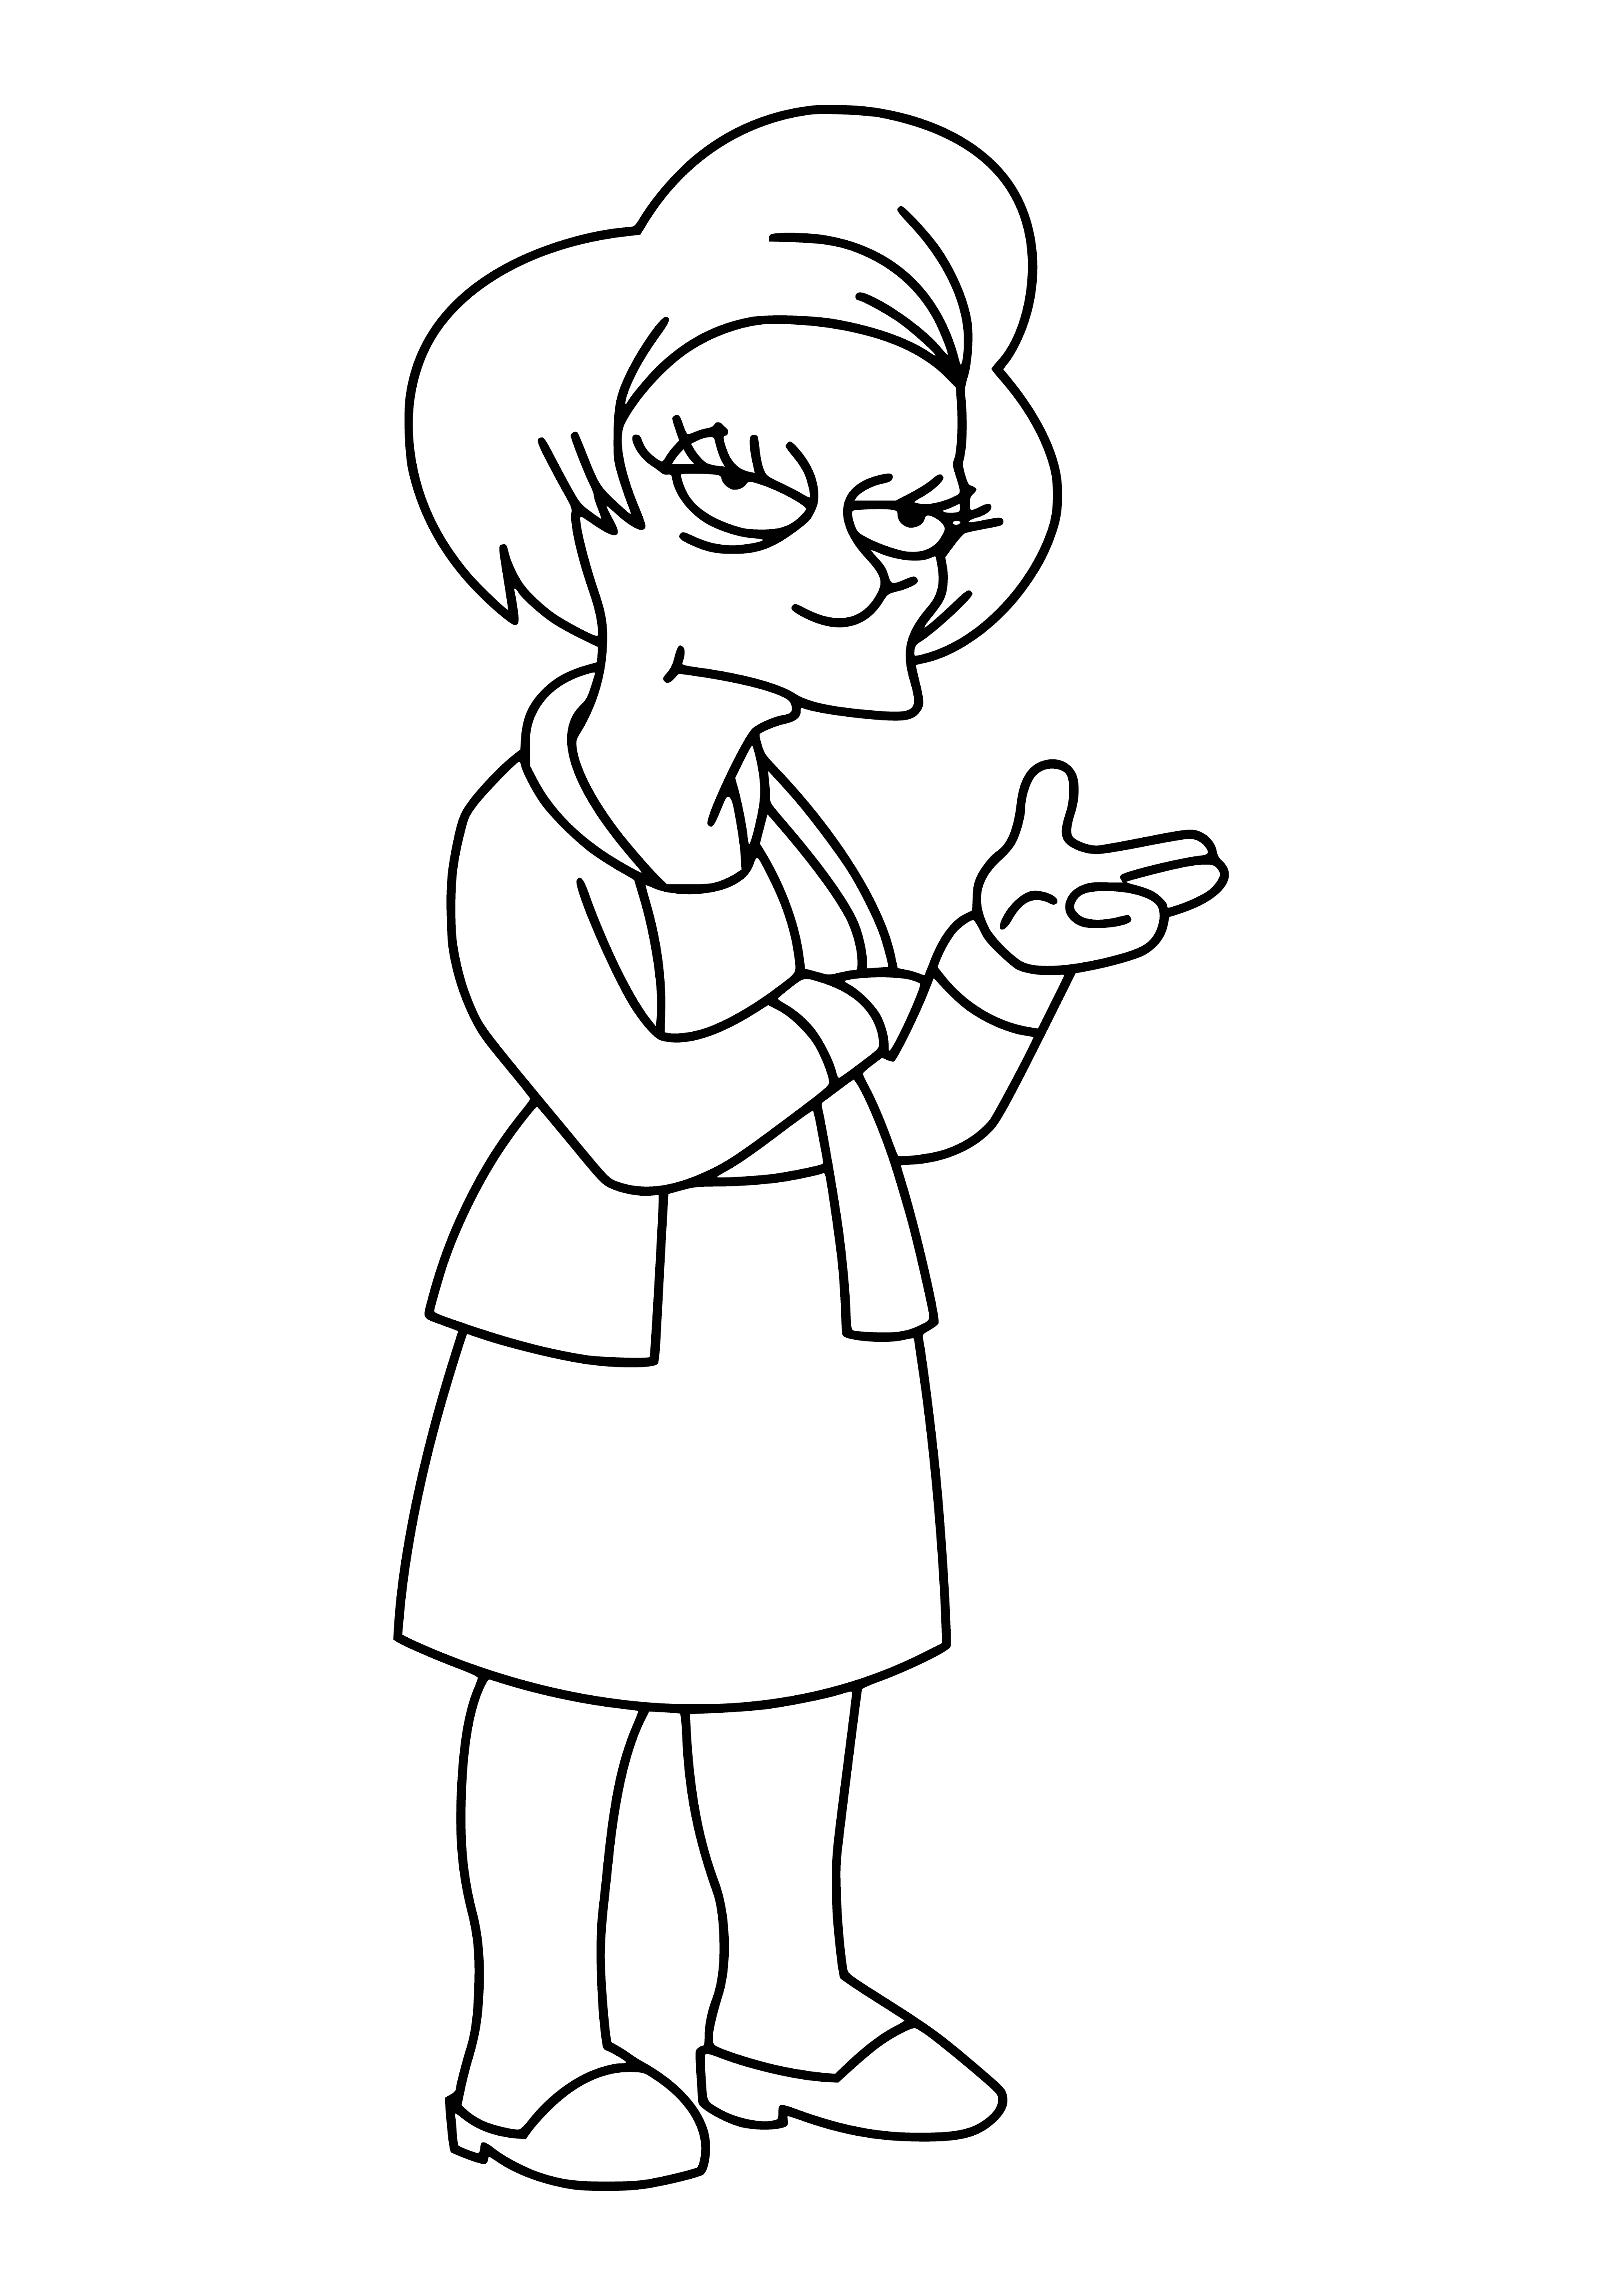 coloring page: Edna Crabapple wears red shirt w/ yellow flower pattern, square glasses & has crossed arms, smiling.